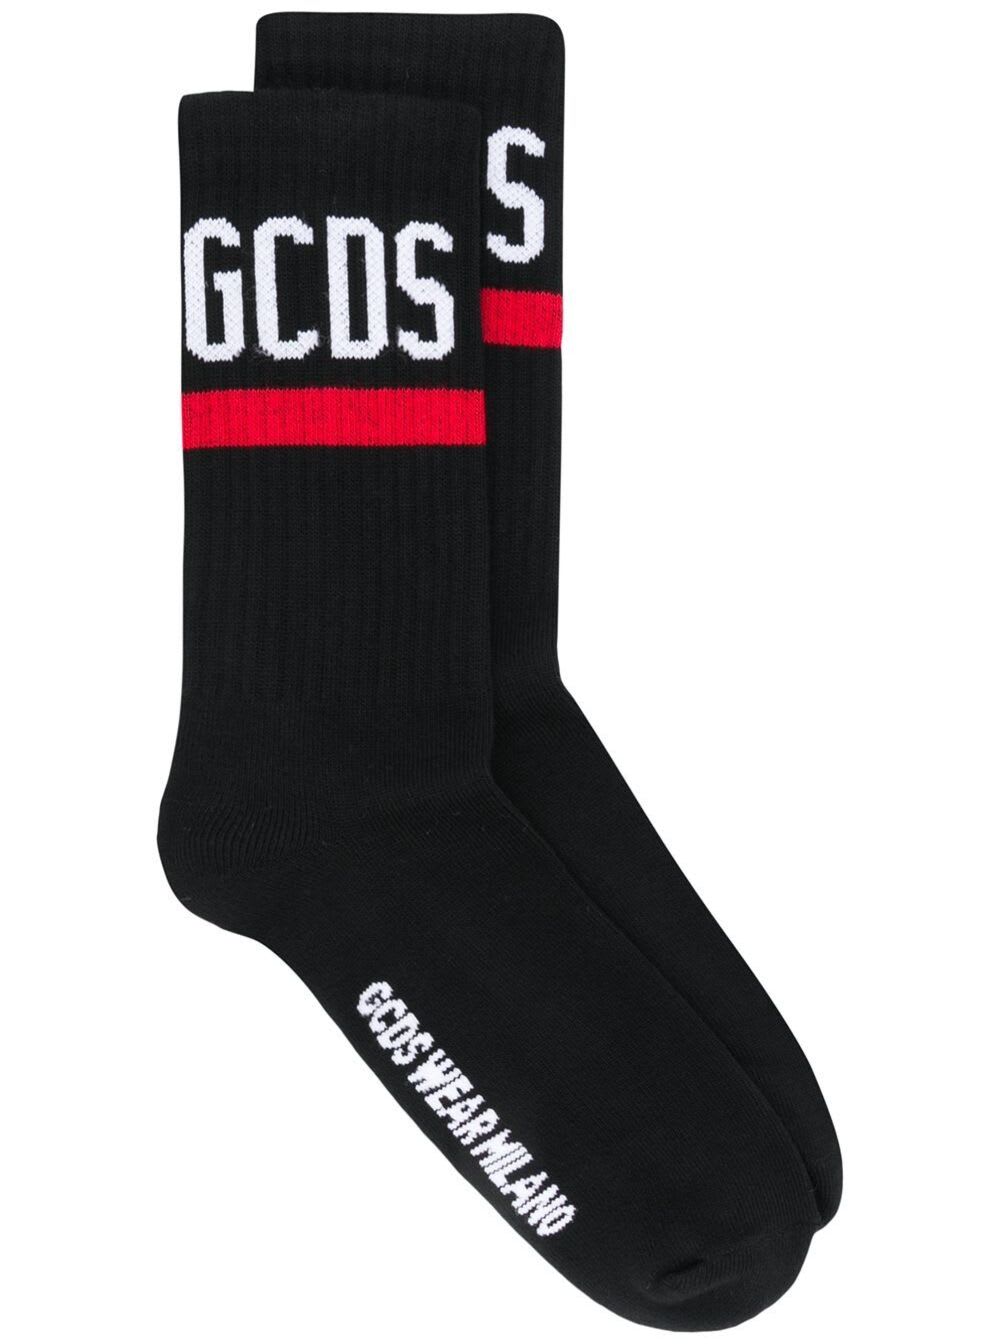 Black Socks In Terry Cloth With Logo And Contrasting Details Gcds Man